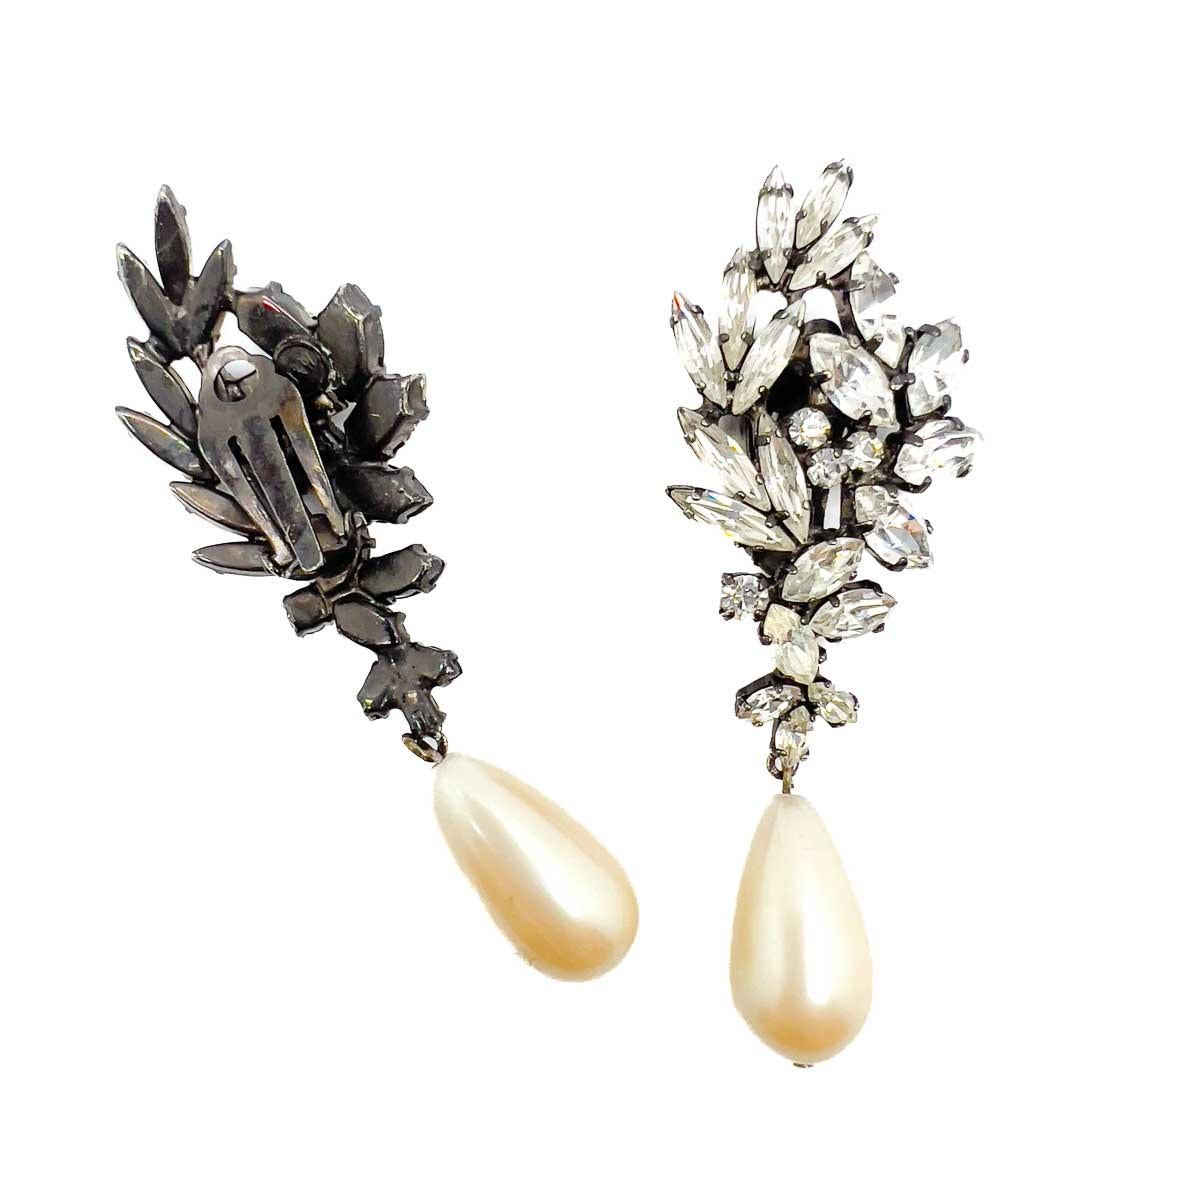 A pair of Vintage Butler & Wilson Crystal & Pearl Droplet Earrings. Exquisite navette cut stones in a stone rich setting are finished to perfection with a large drop pearl. The epitome of elegance.


Butler and Wilson began in 1969 selling antique